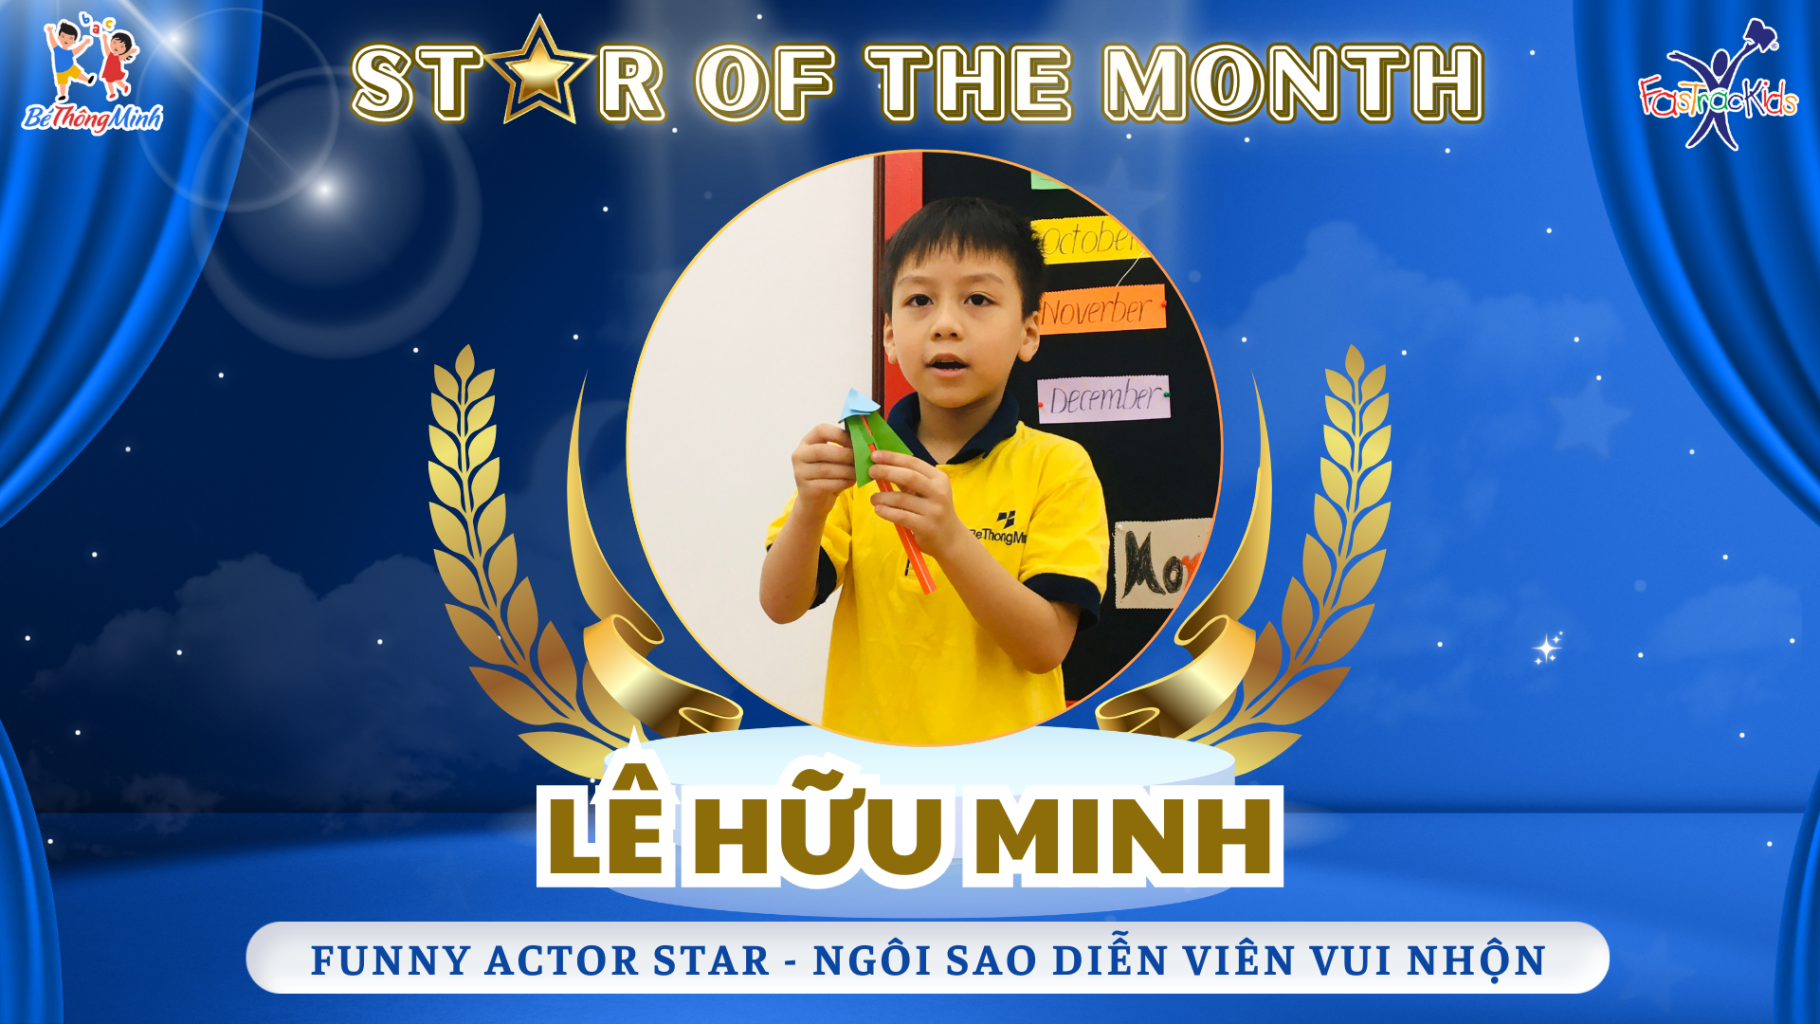 Funny Actor Star of the month May